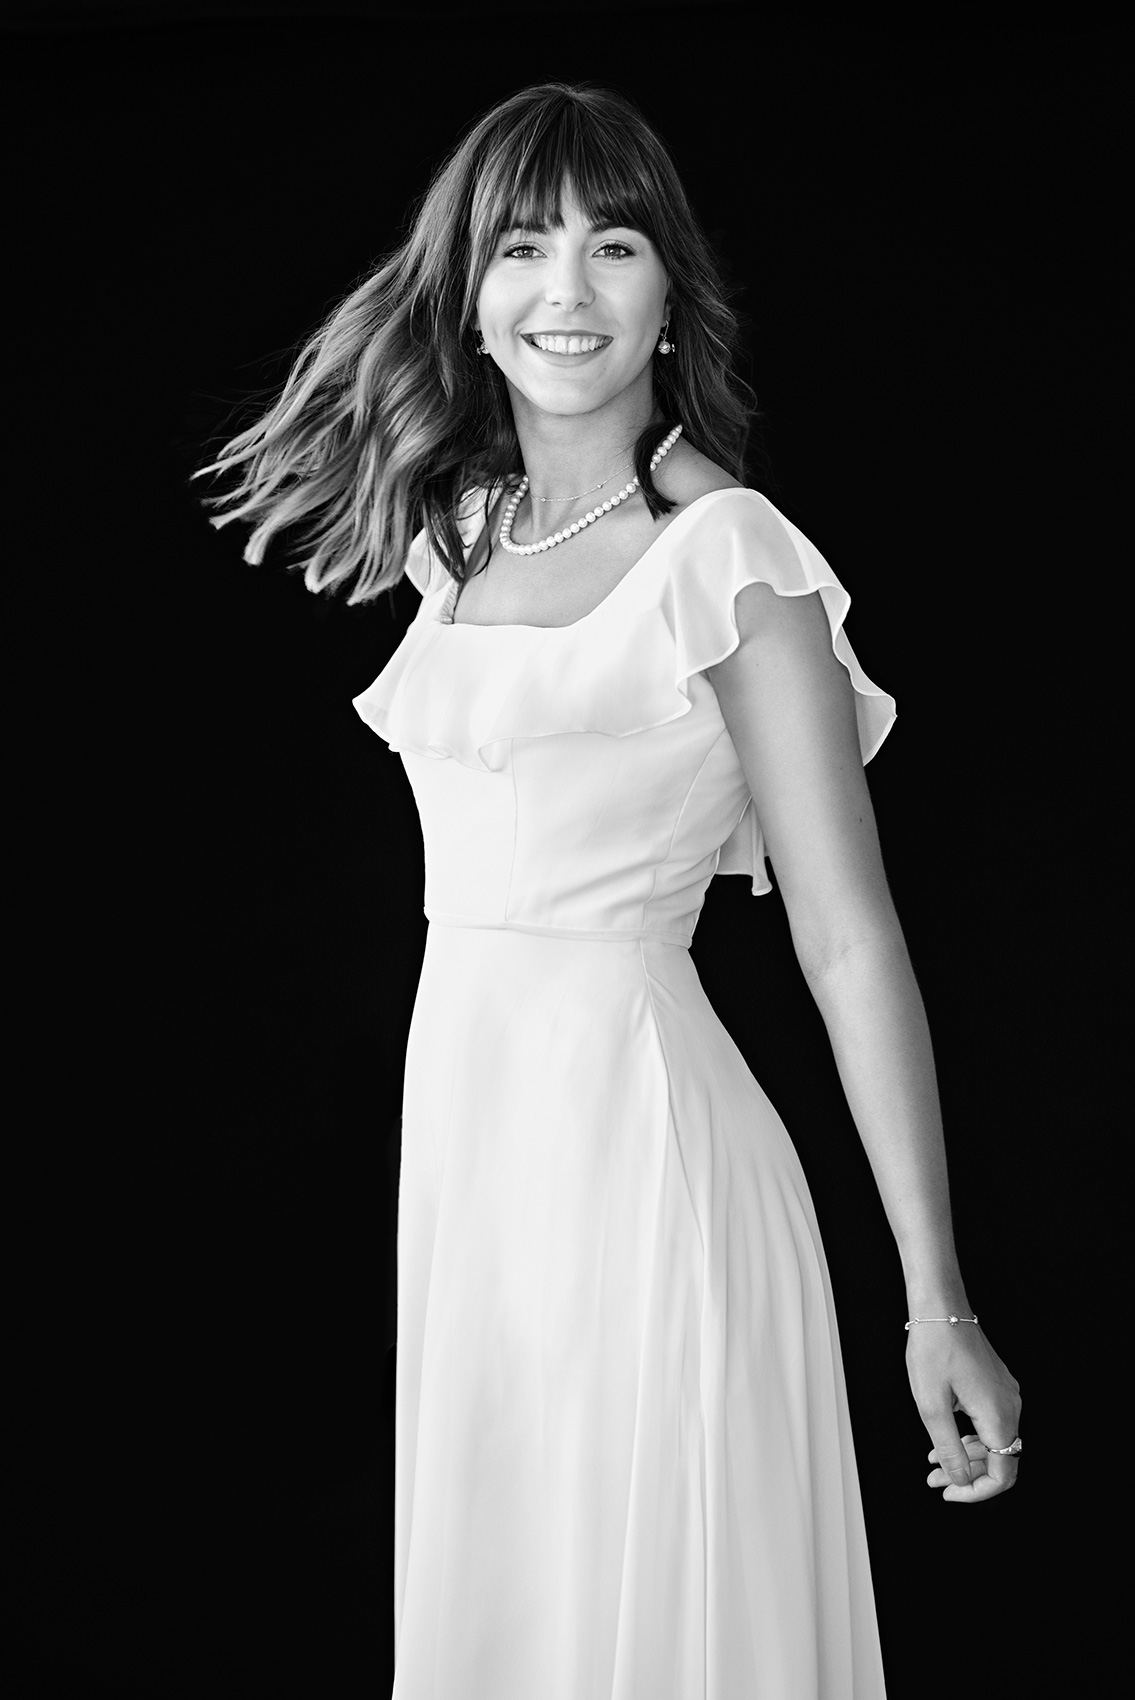 Weeldreyer black and white graduation day portrait in a white dress